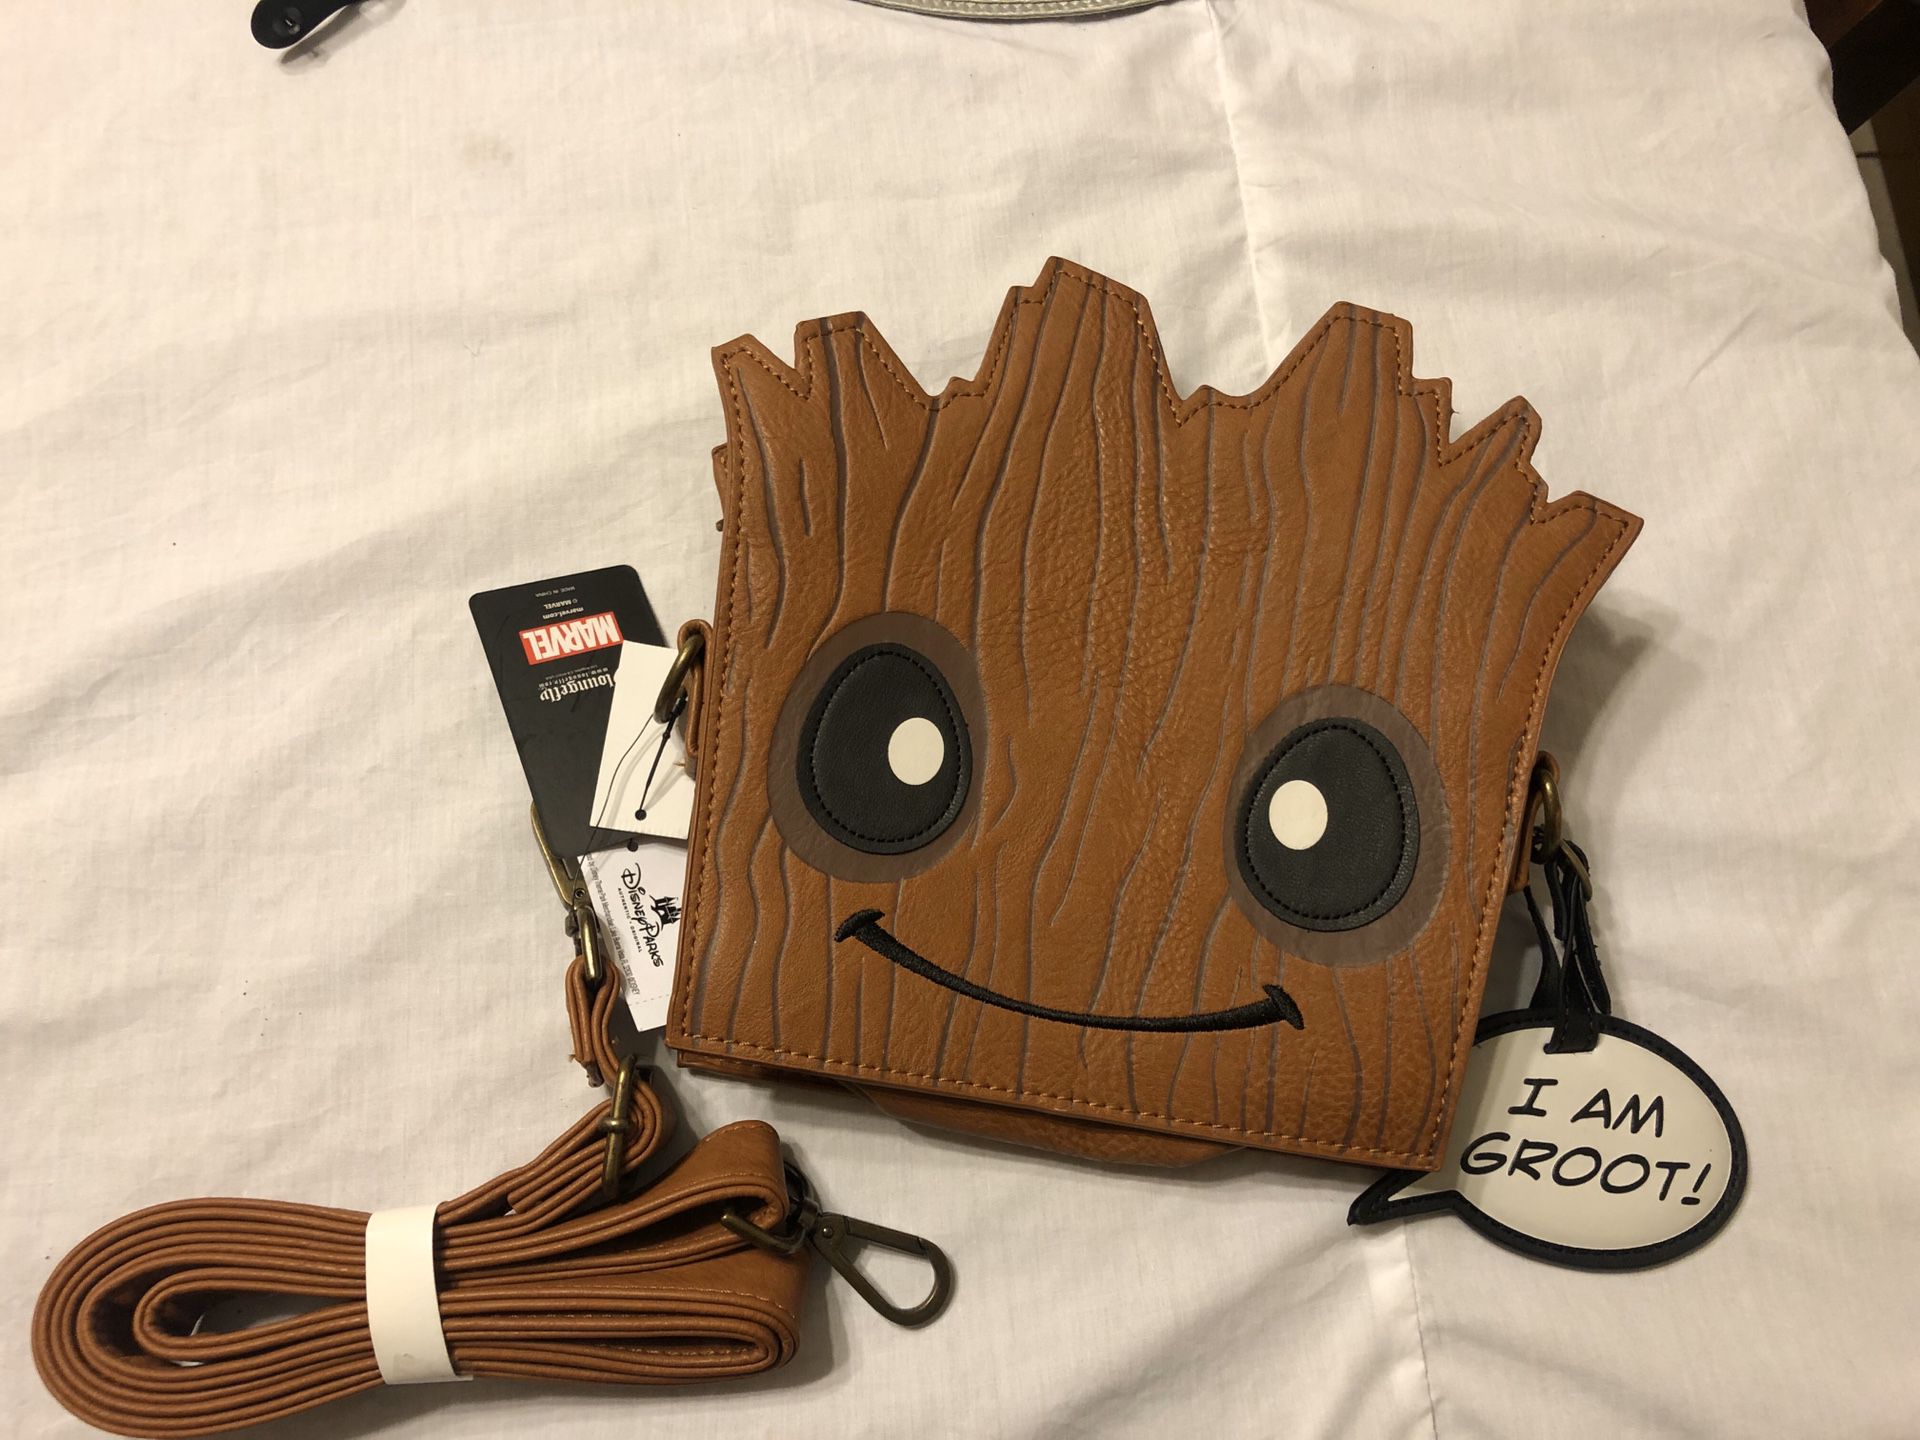 Marvel Disney Guardians of the Galaxy Loungefly Groot Cross bag